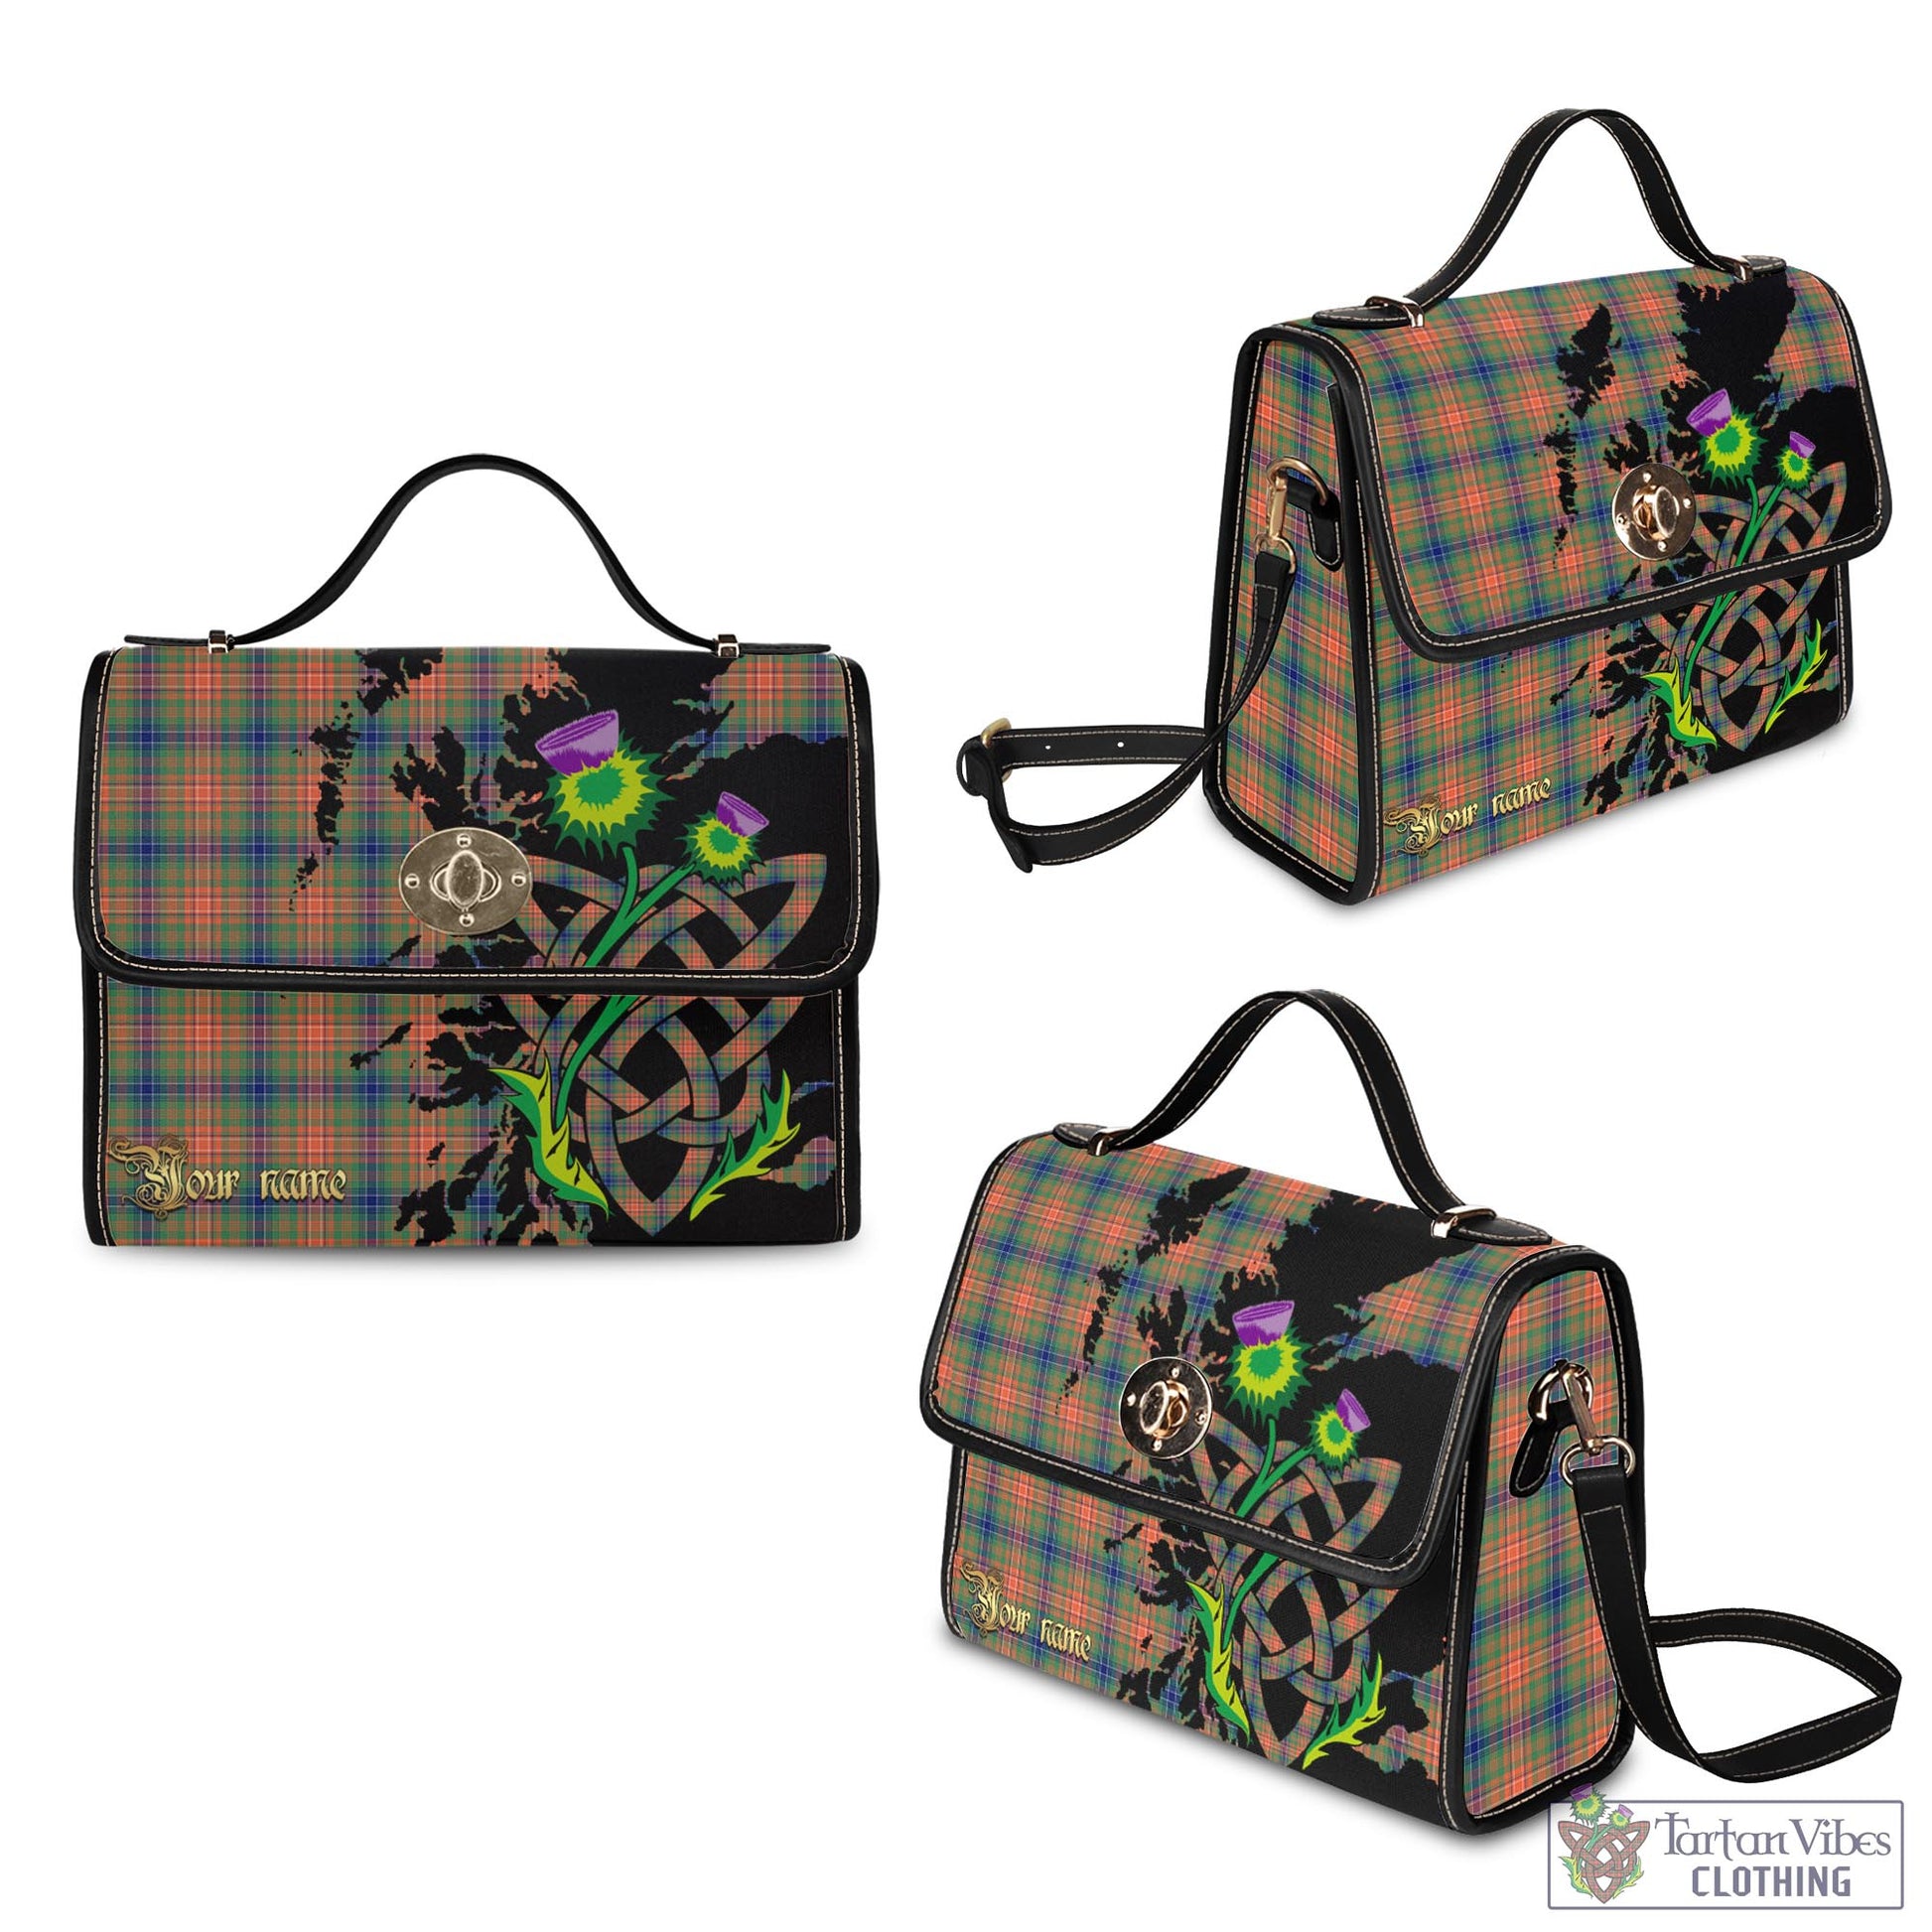 Tartan Vibes Clothing Wilson Ancient Tartan Waterproof Canvas Bag with Scotland Map and Thistle Celtic Accents